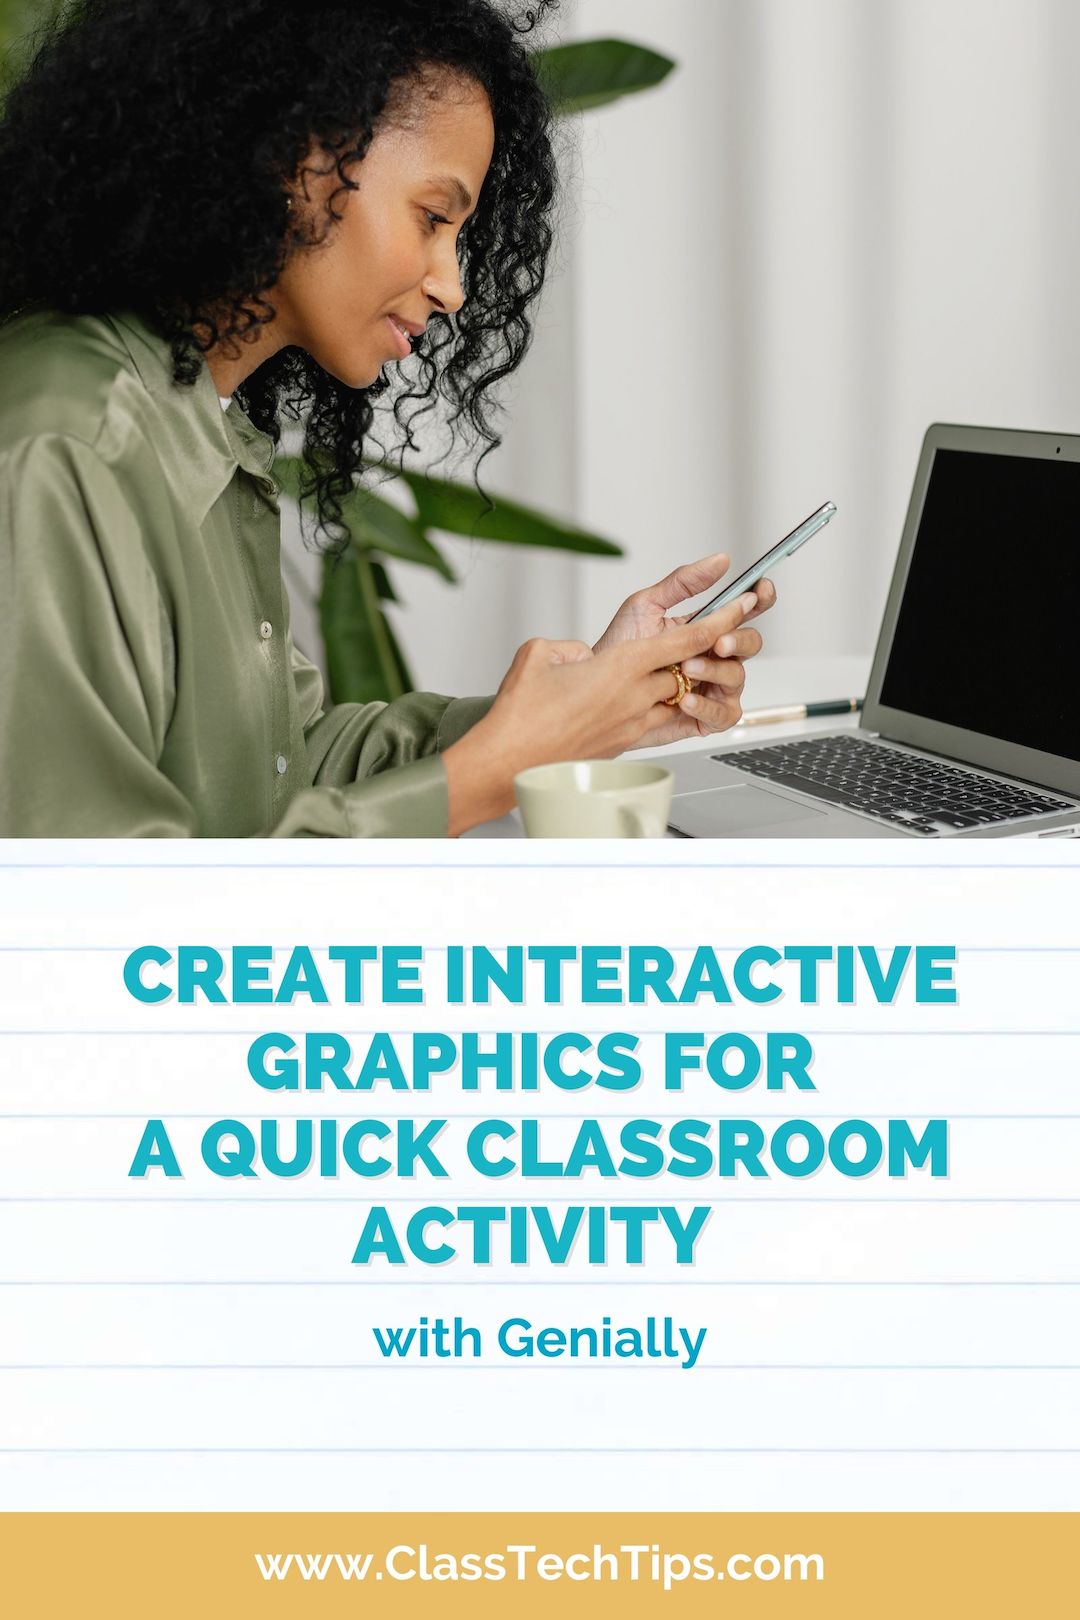 Are you looking for a quick classroom activity? Give students space to create can help them apply and celebrate their learning with Genially.